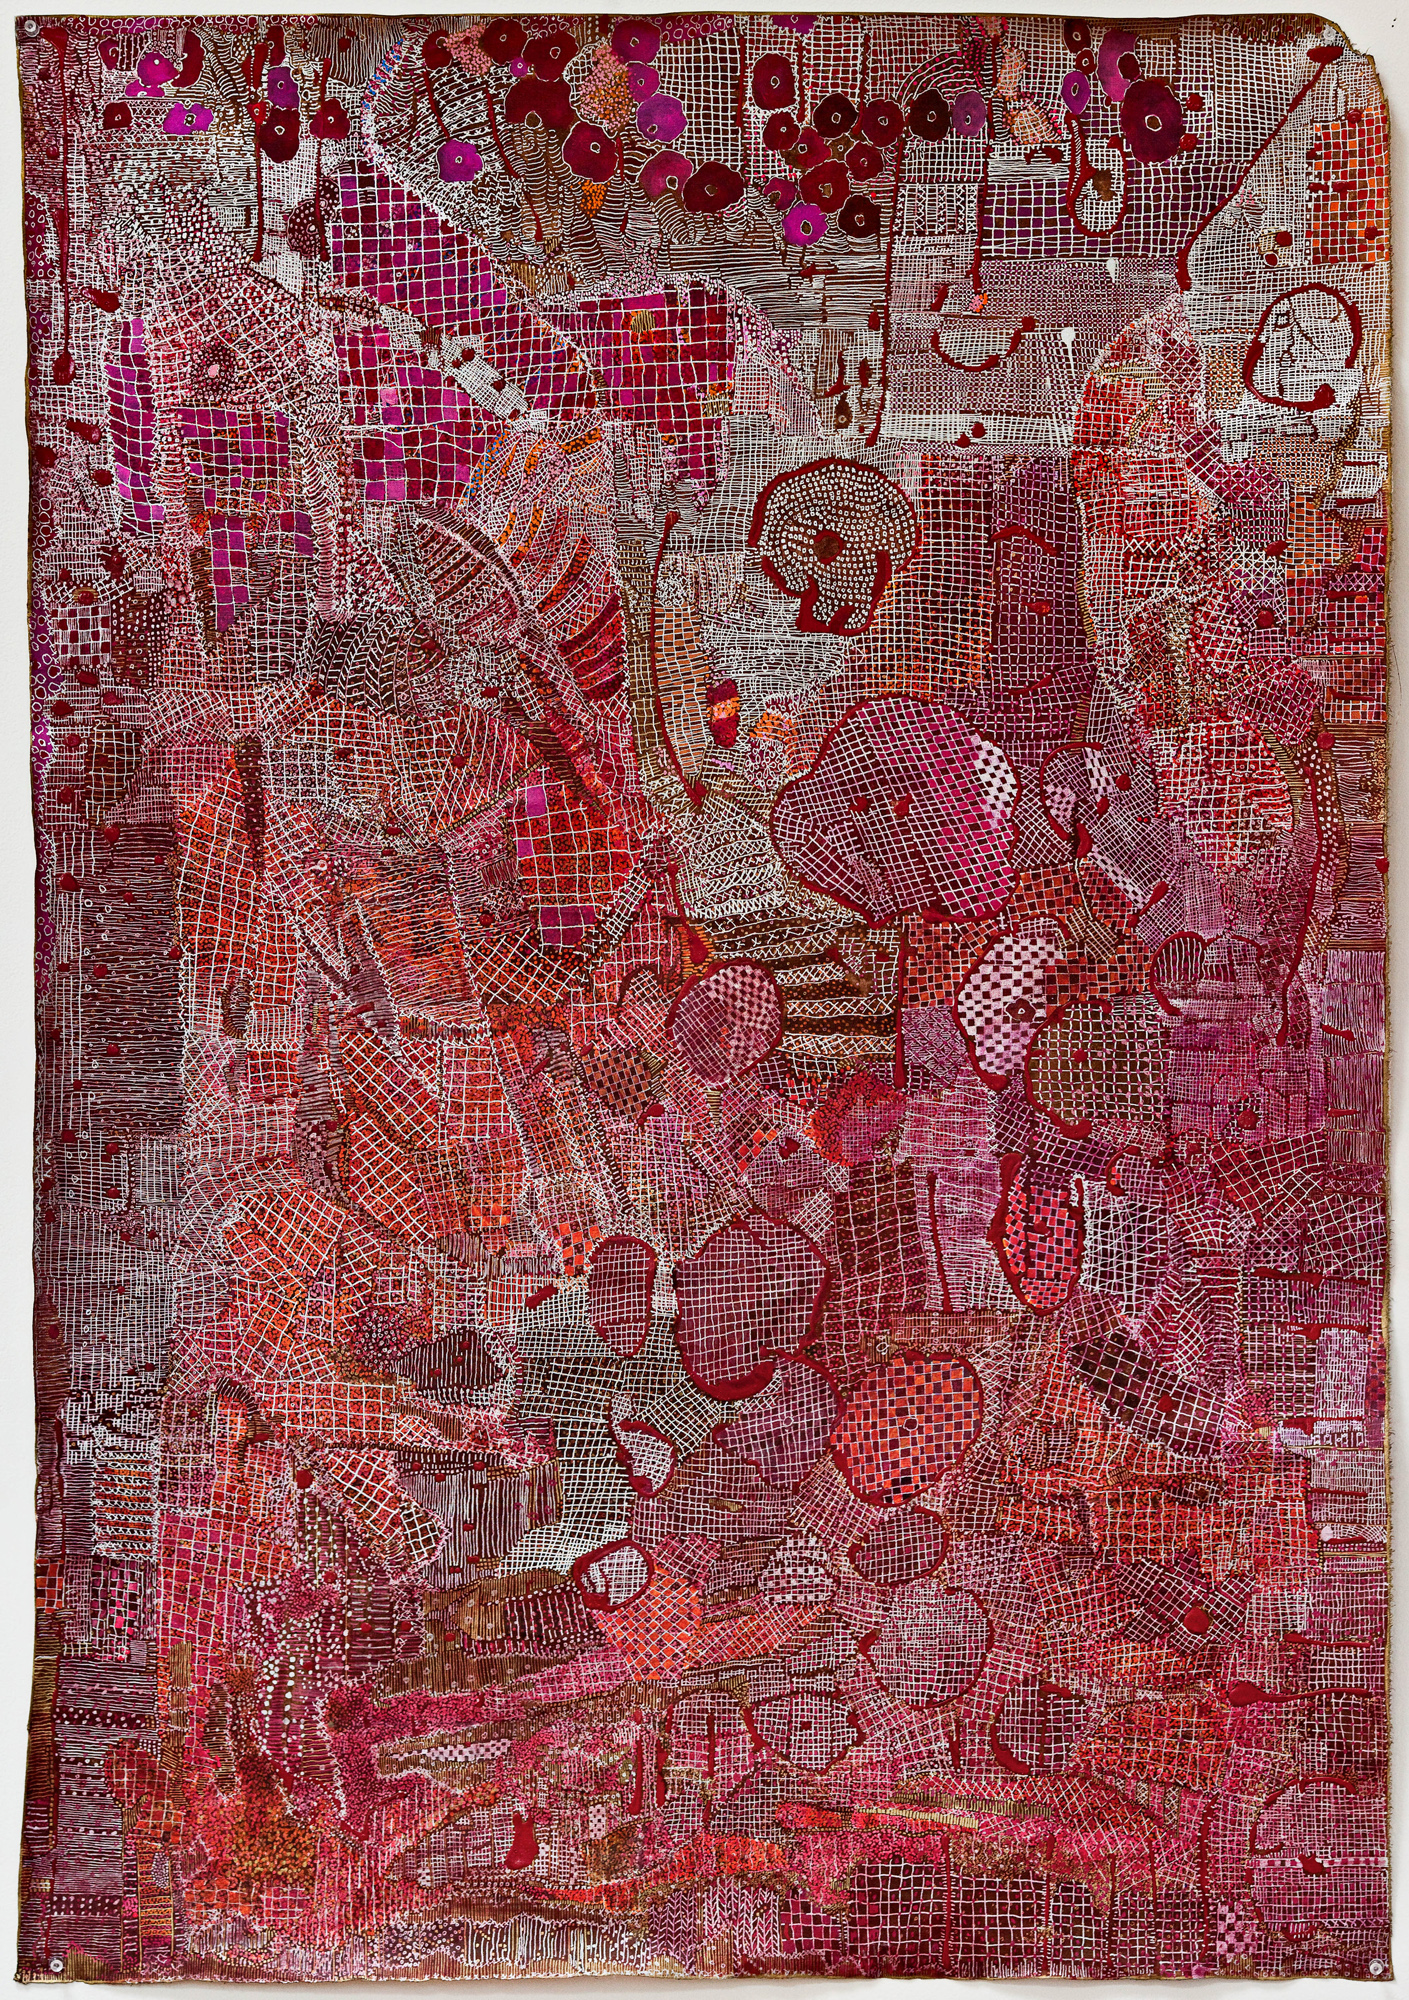 1200_Untitled_Red_mixed media on canvas_50 x 34_2010.jpg